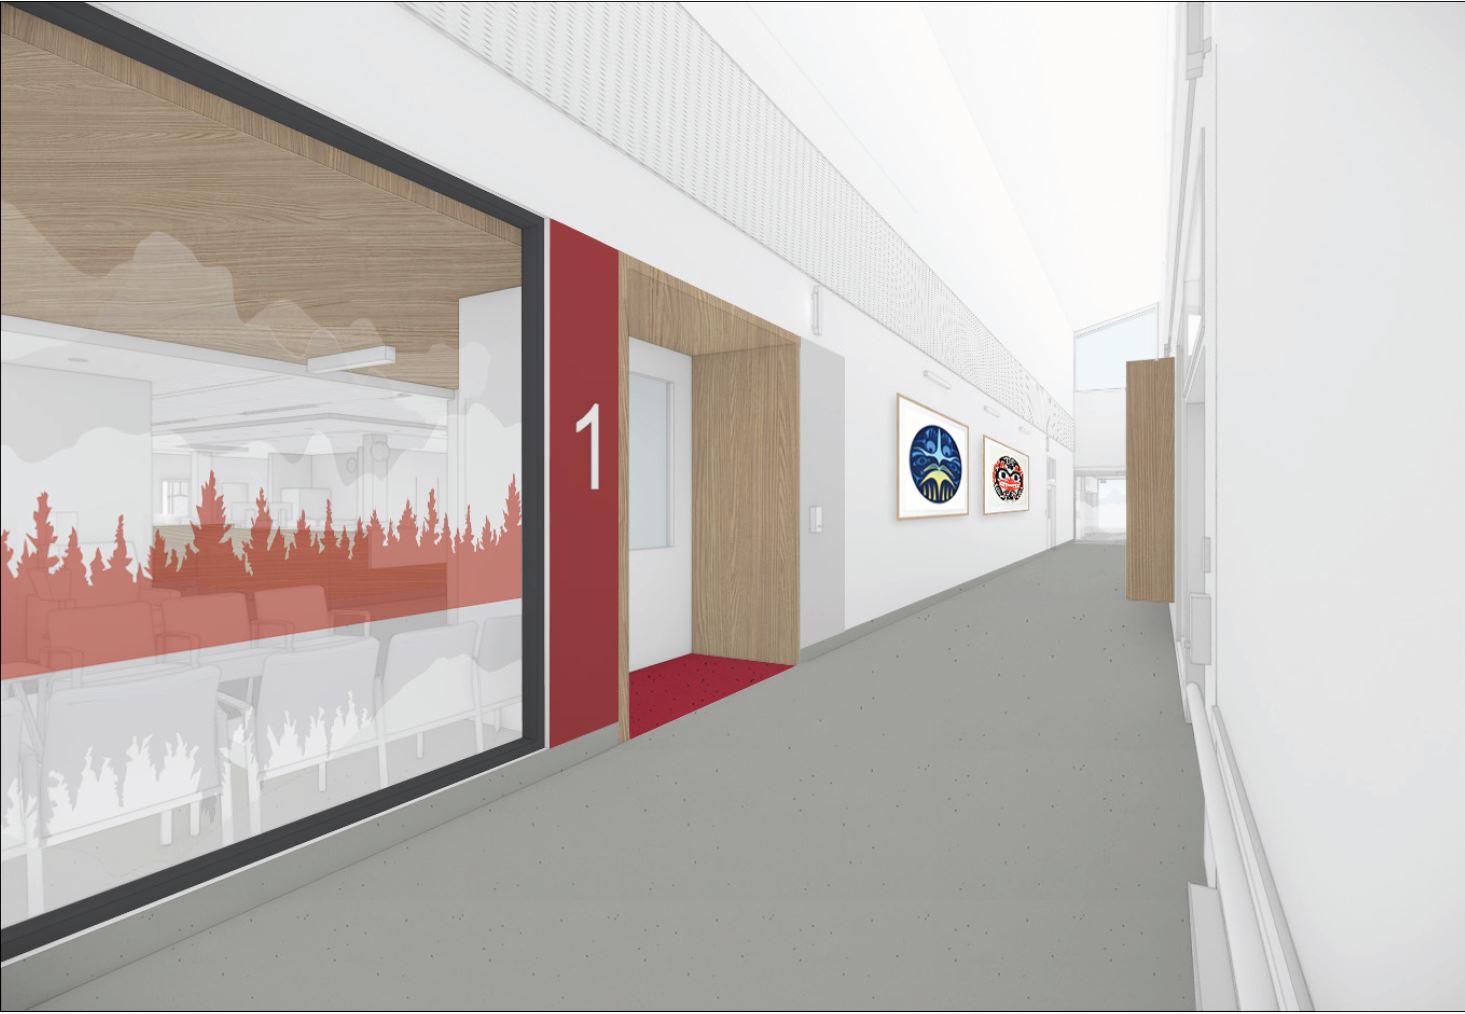 Concept rendering of the entrance to Zone One in the new emergency department. Designs may be subject to change.